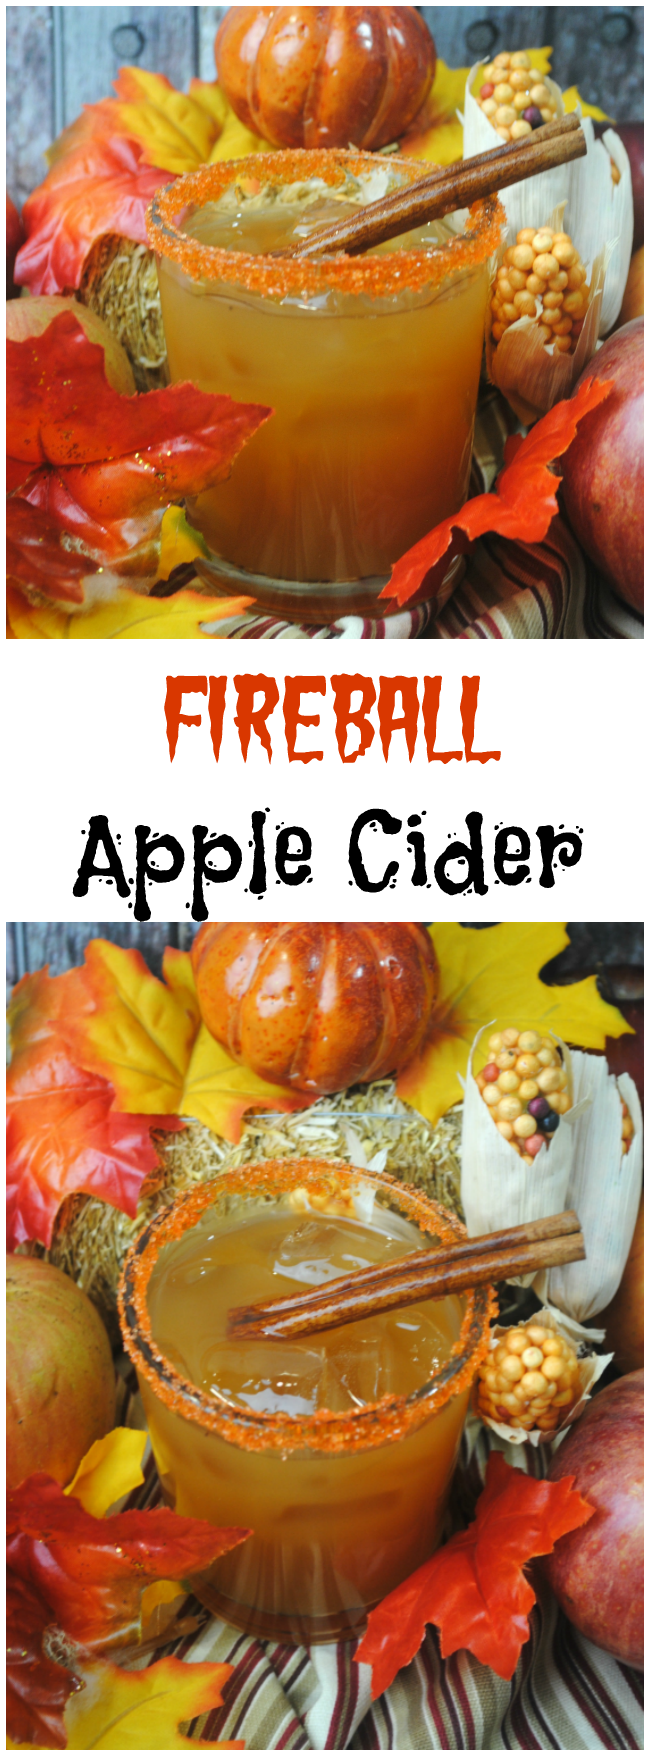 Here's a little Fireball Apple Cider recipe that will surely warm you up on a cold crisp evening. And I don't mean "warm" in the sense of microwave. 